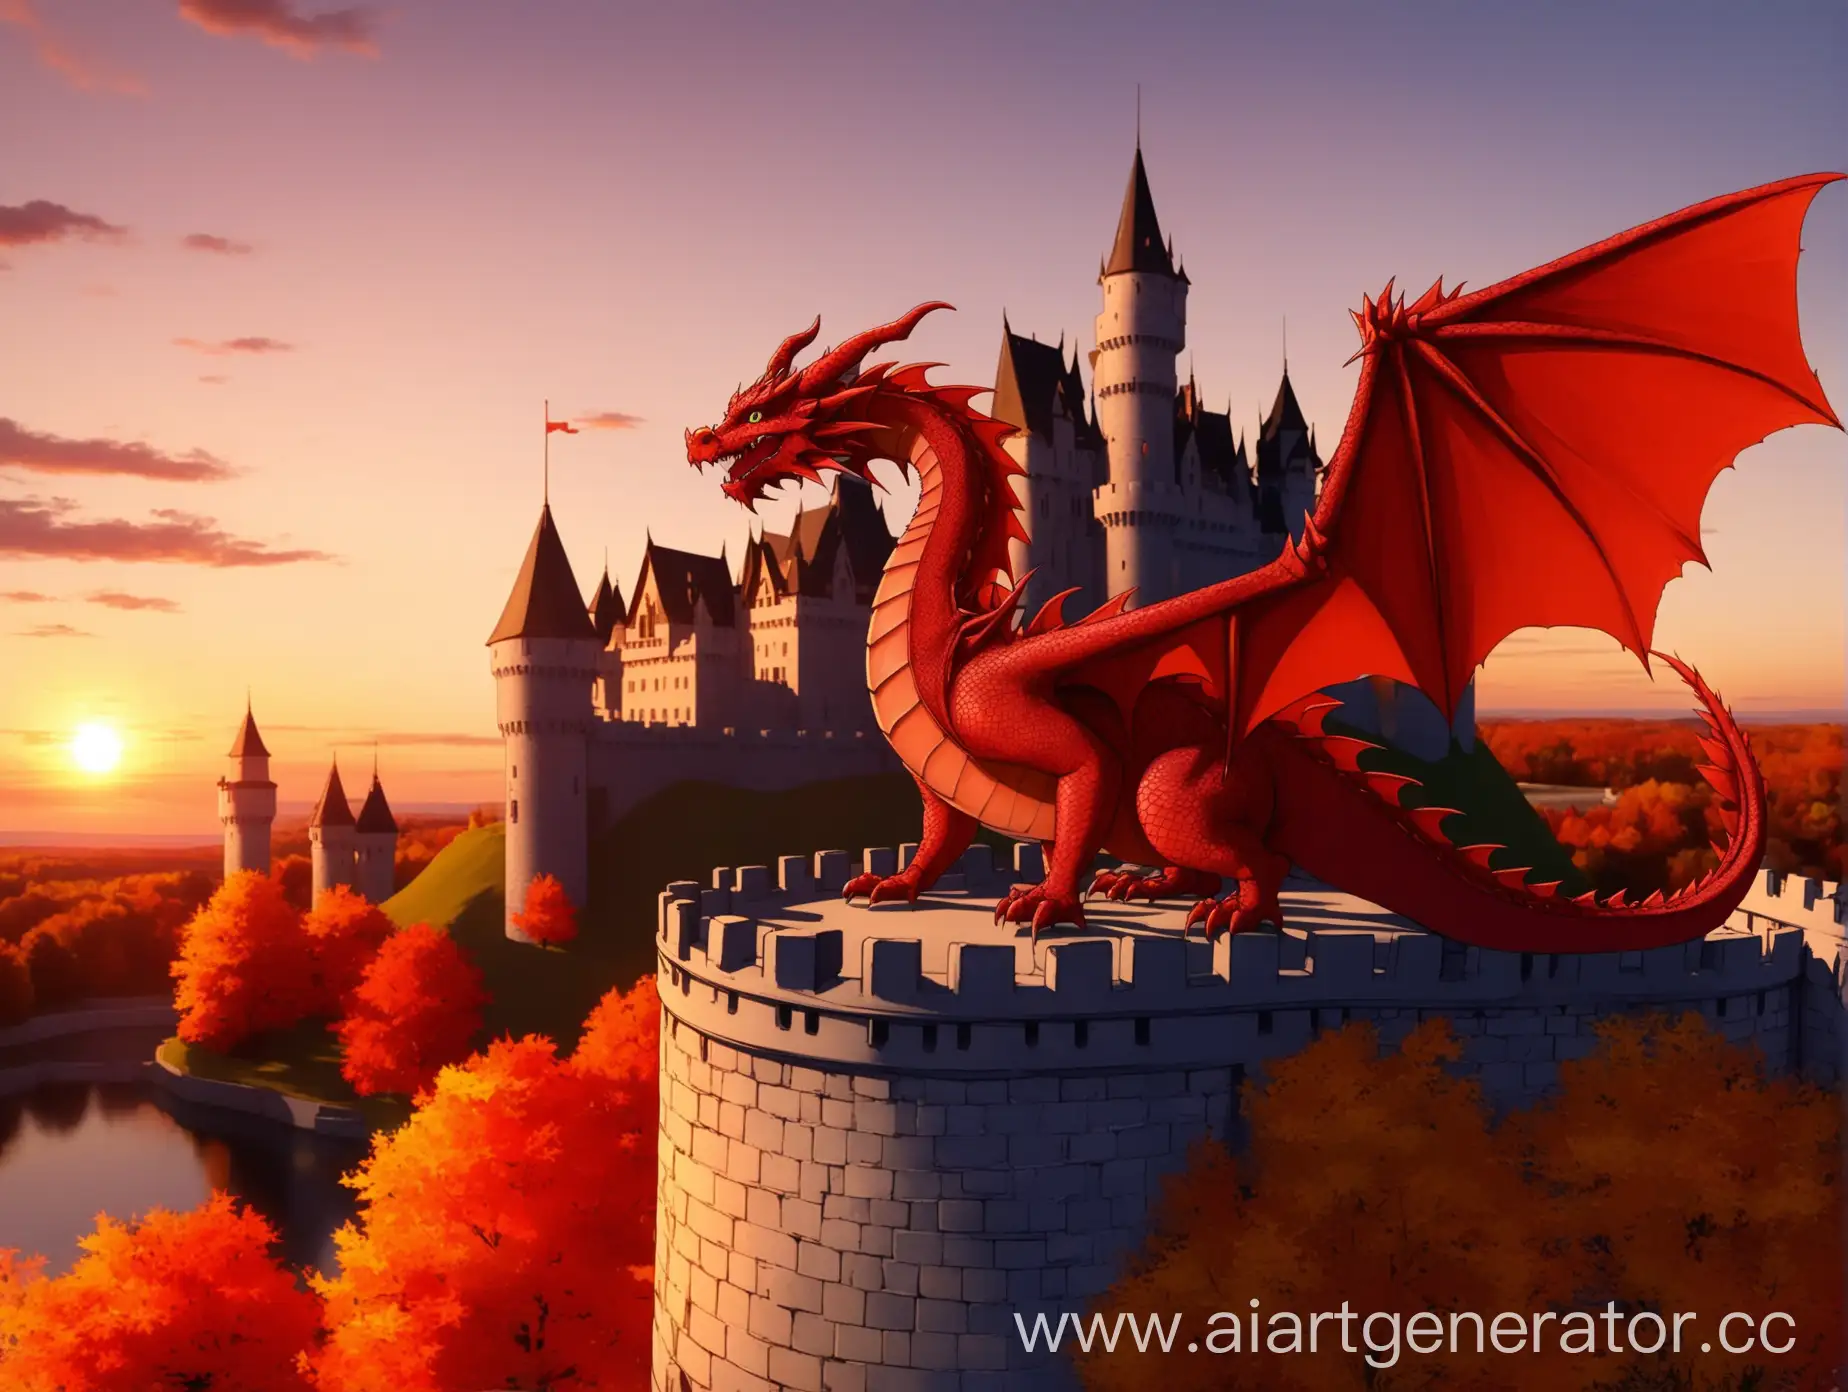 Red-Dragon-Perched-on-Castle-at-Sunset-in-Autumn